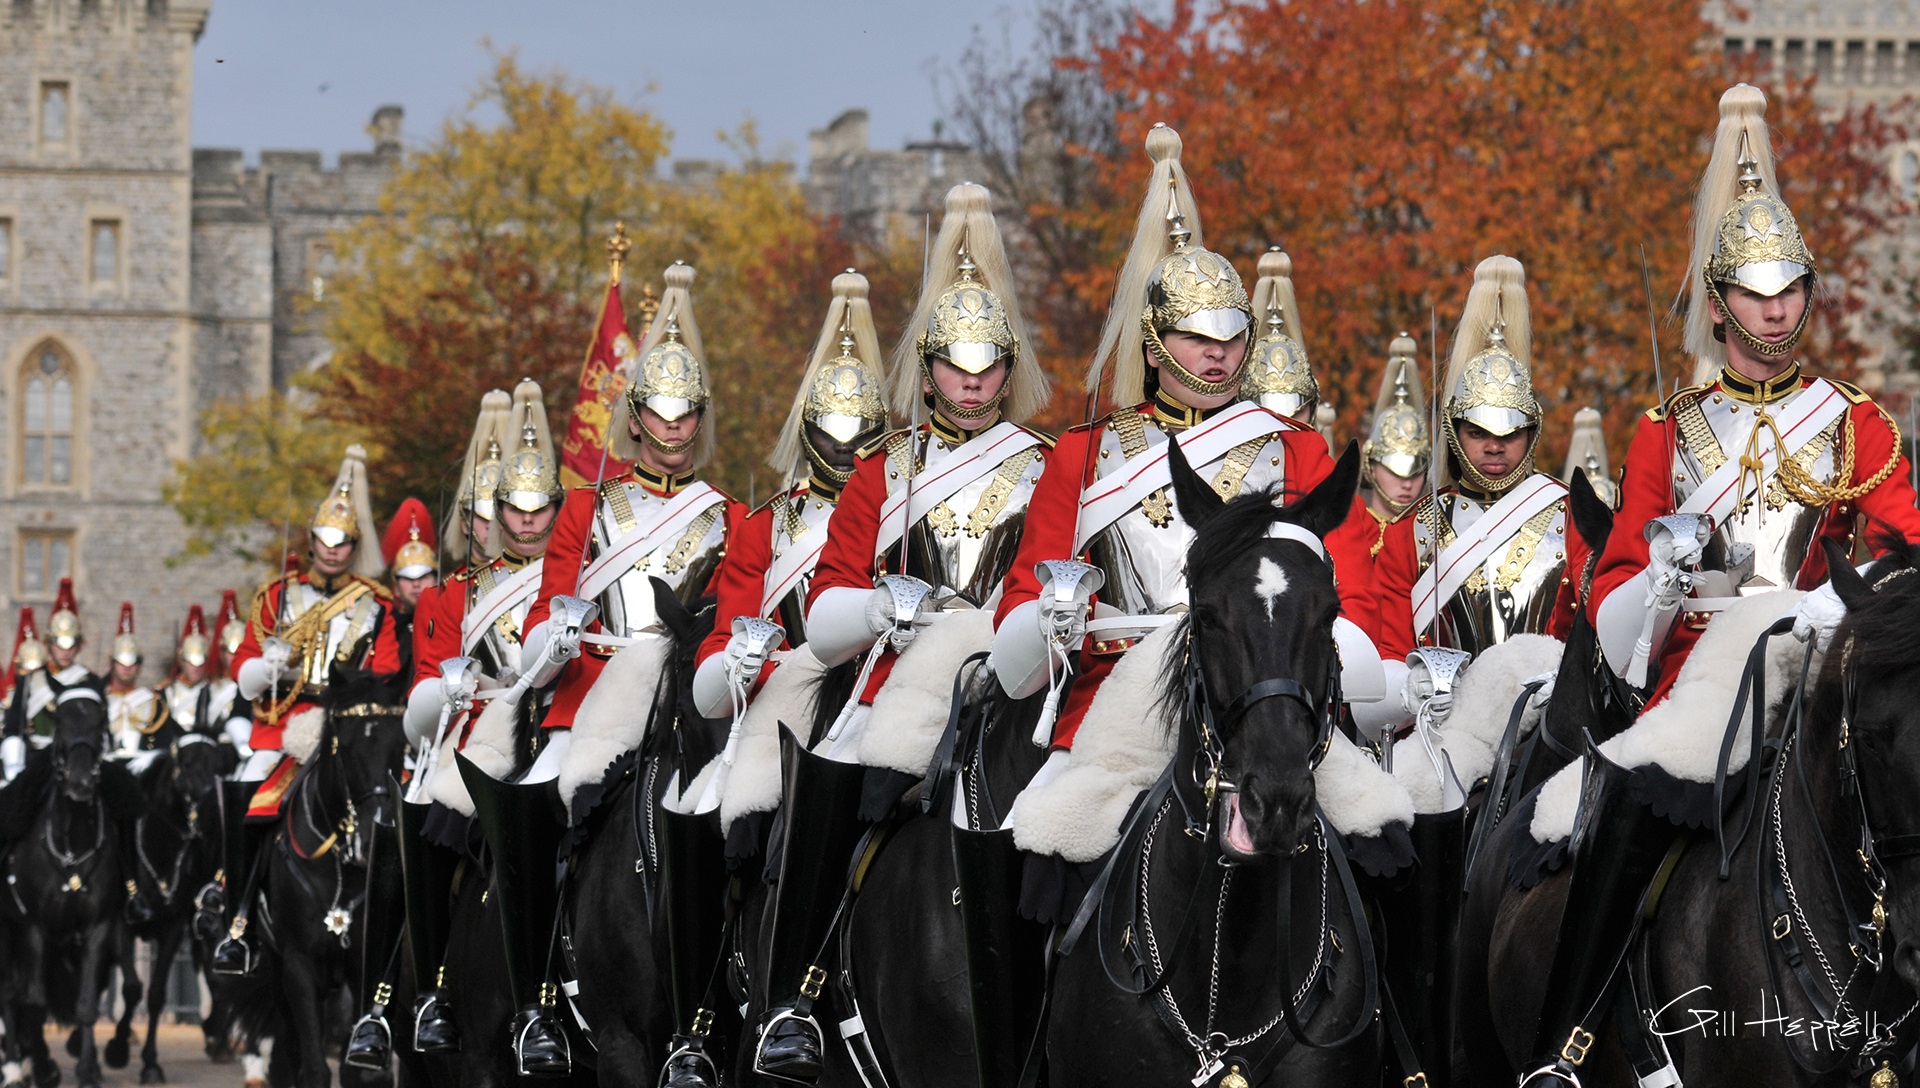 Guards on Parade with horses, The Long Walk